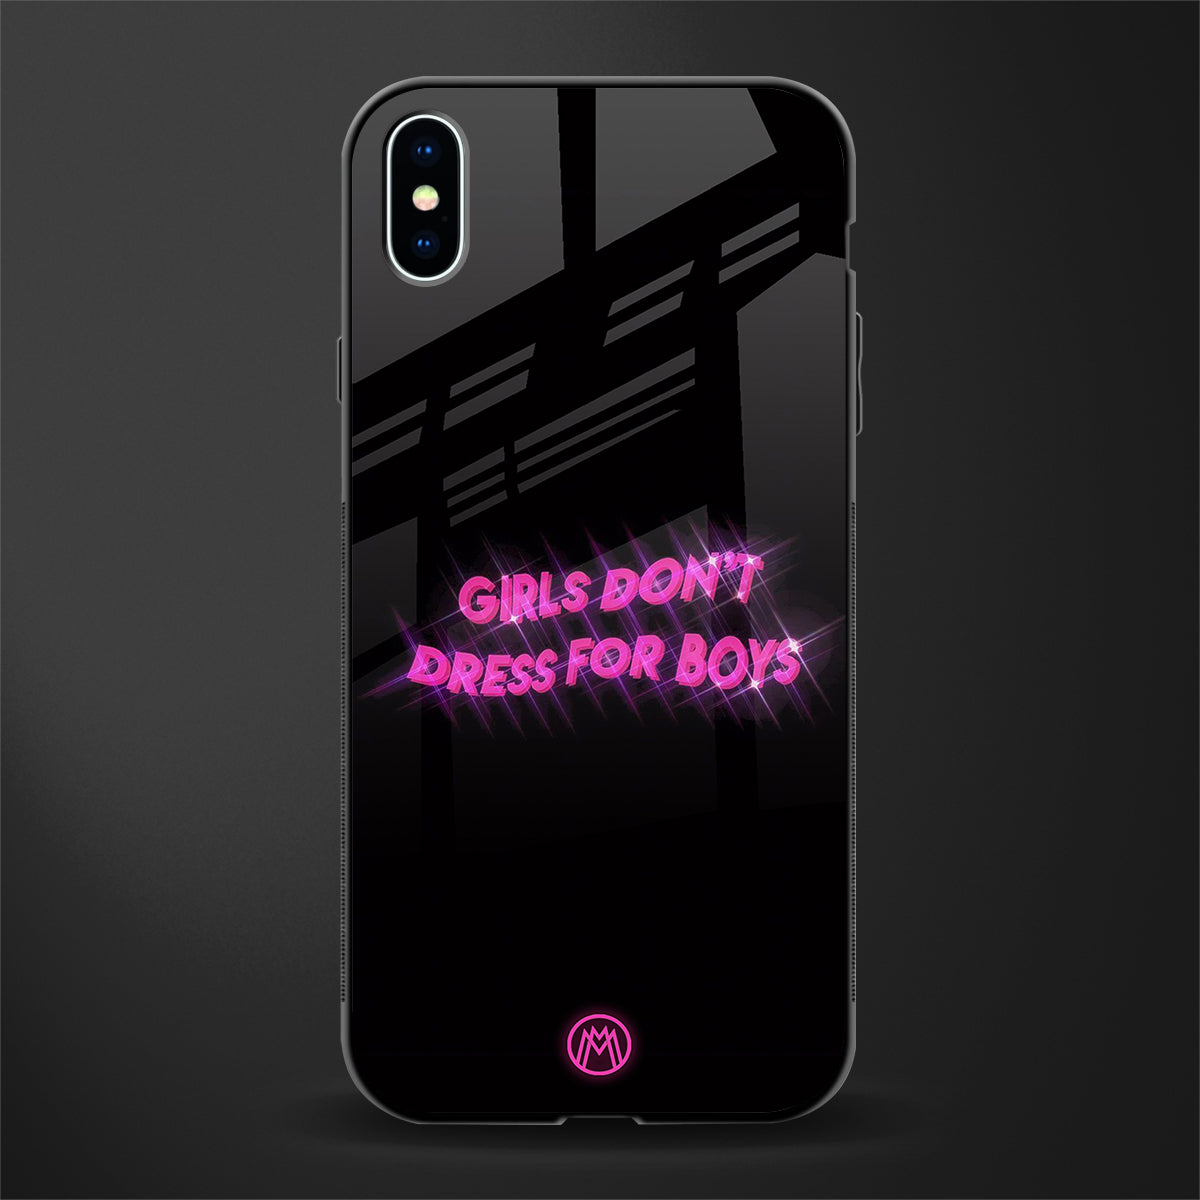 girls don't dress for boys glass case for iphone xs max image